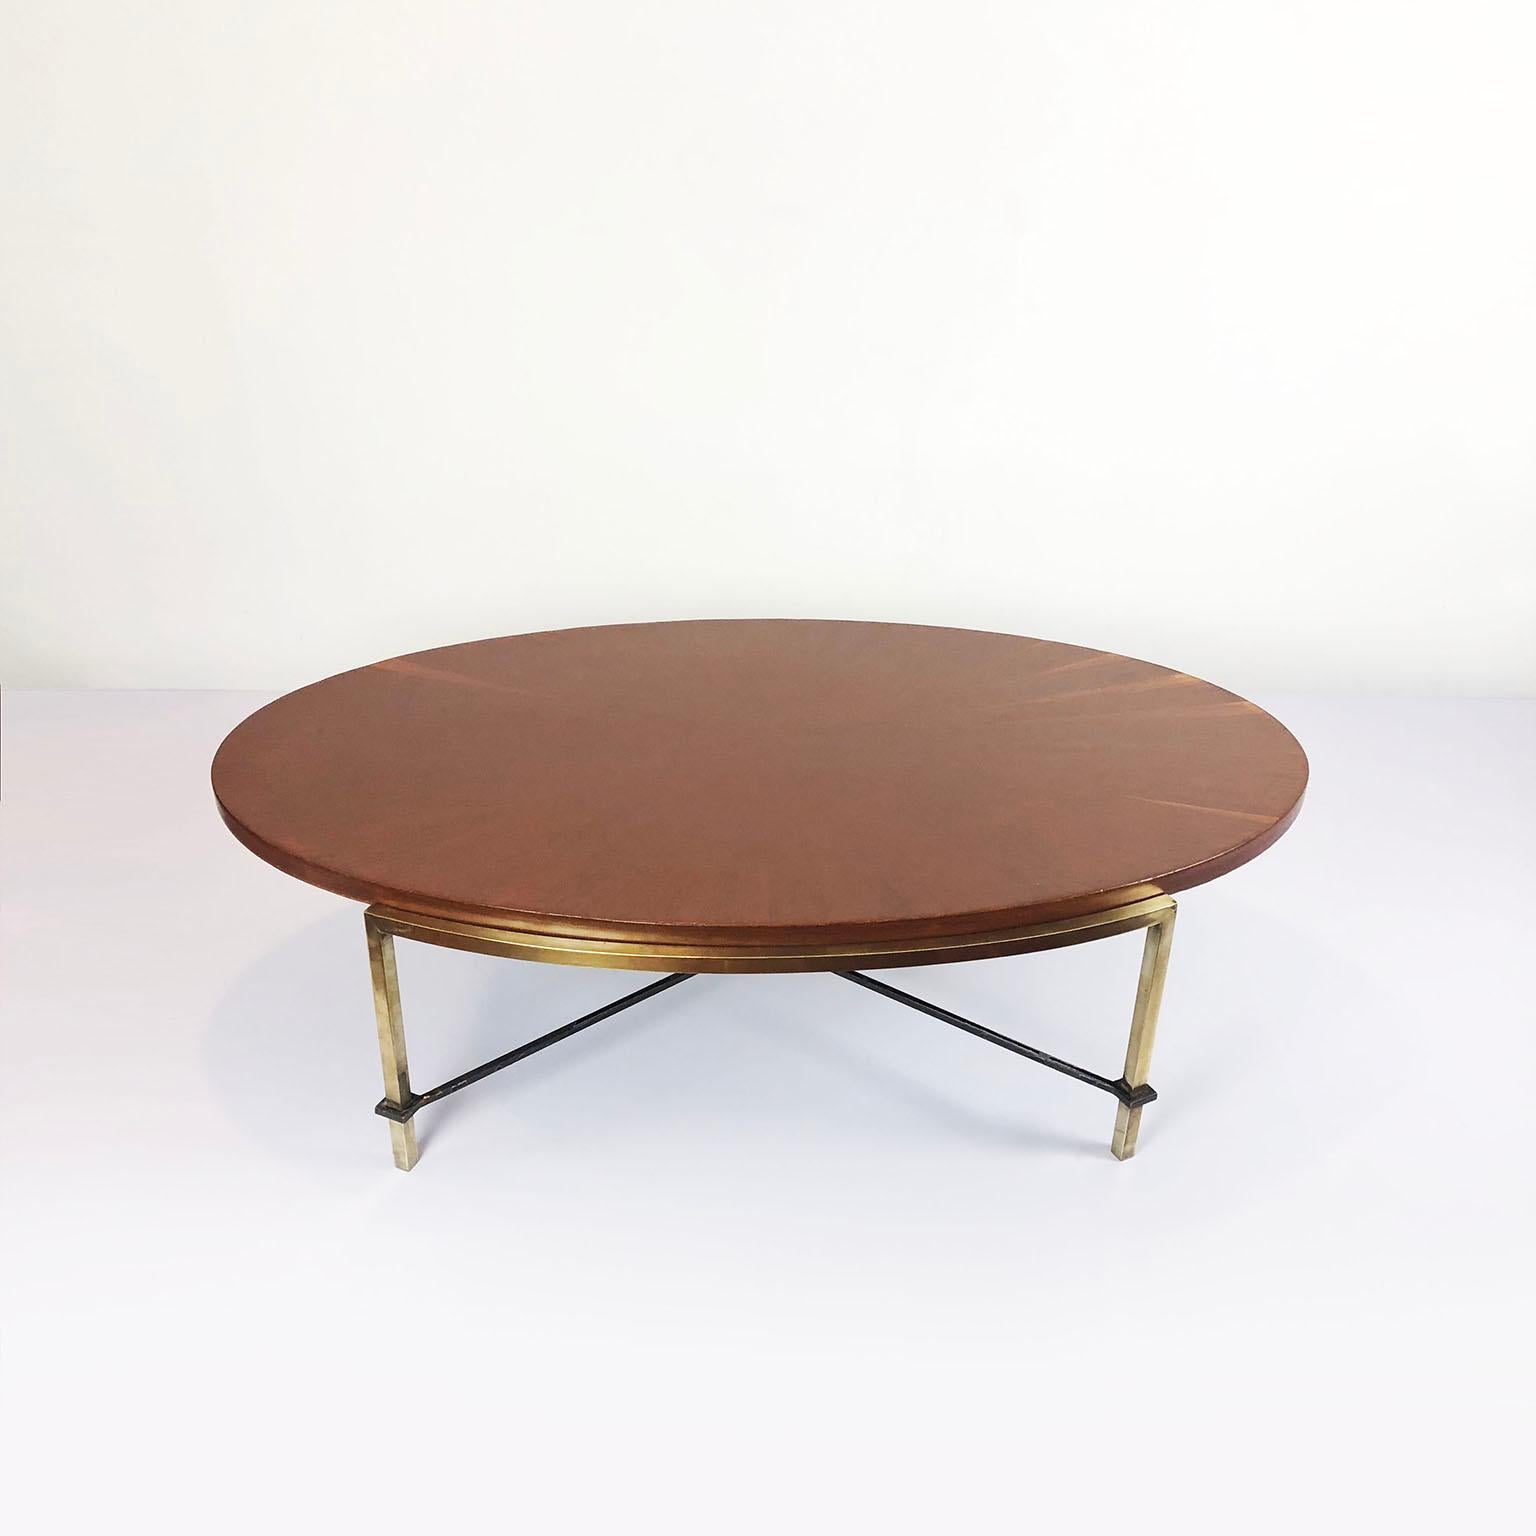 We offer this coffee table in brass and wood with spectacular design by Arturo Pani, circa 1960.